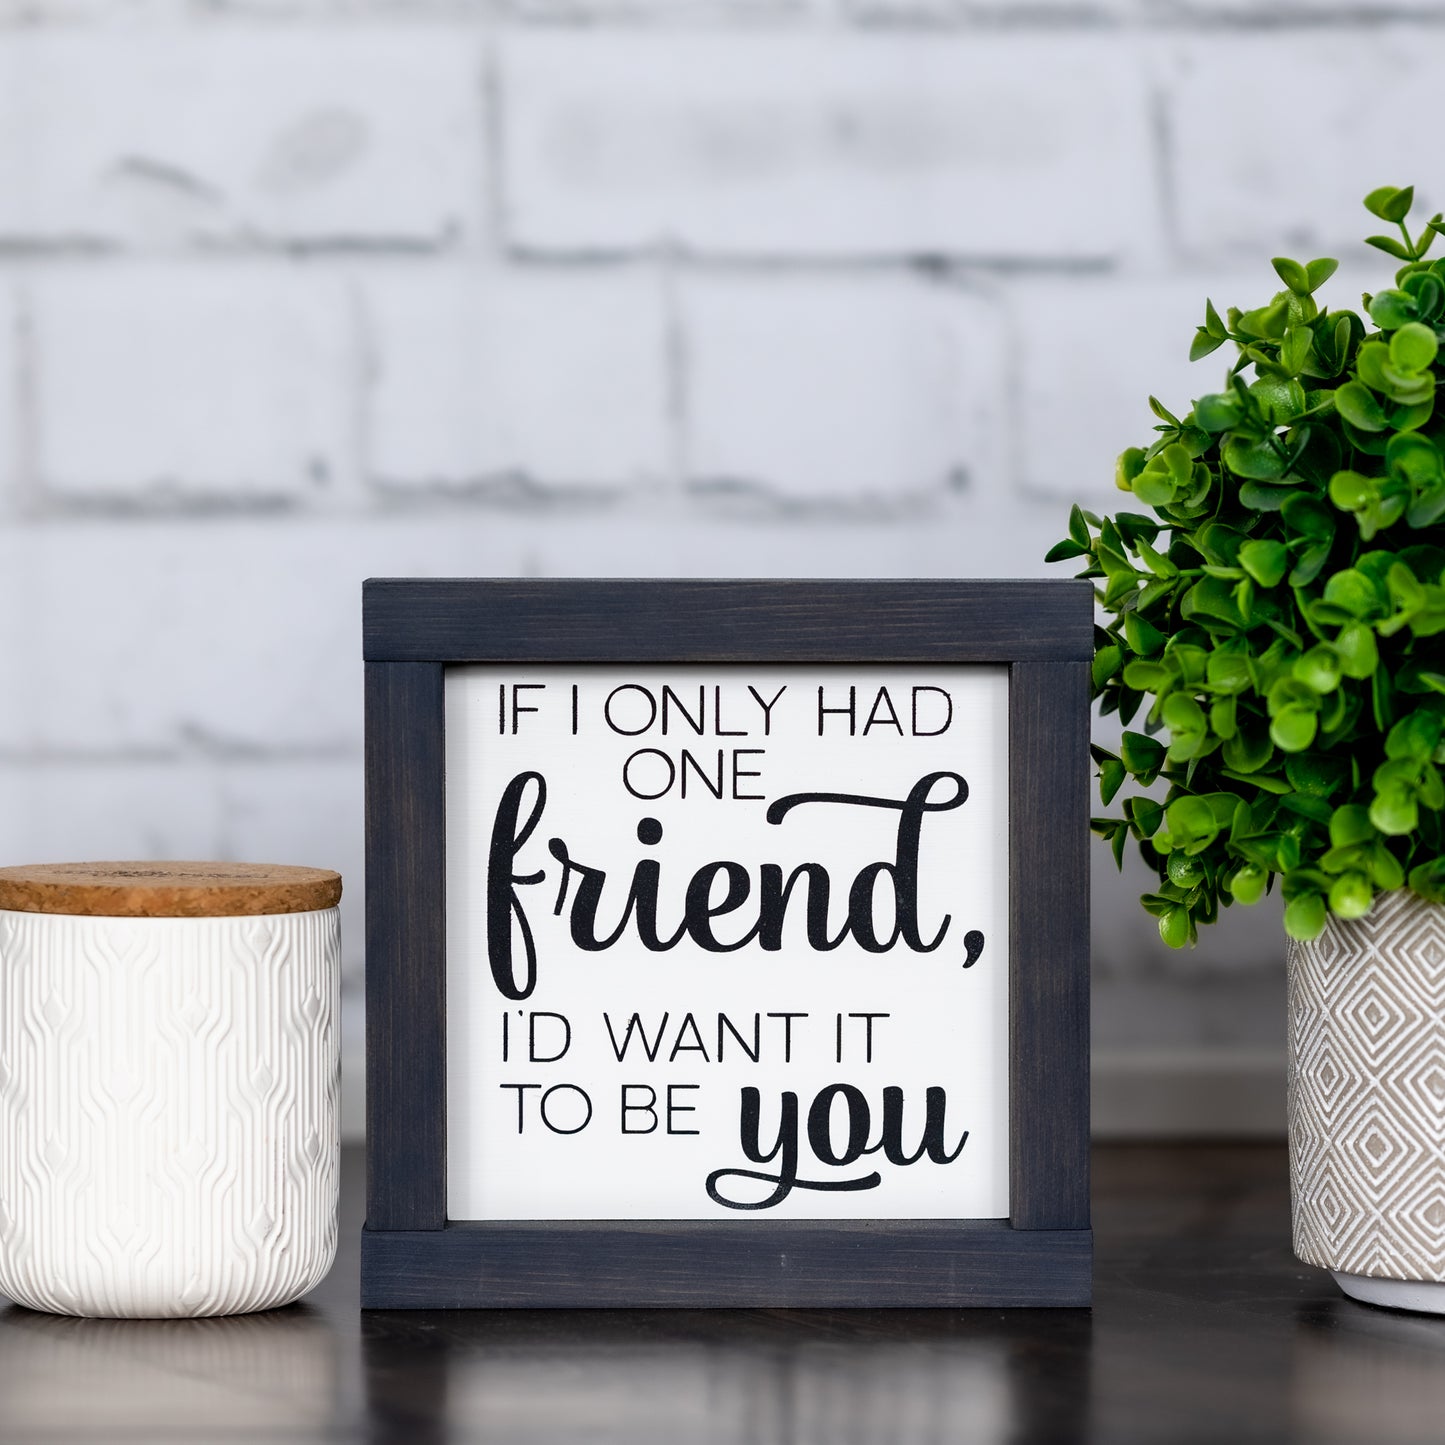 if I only had one friend, I'd want it to be you ~ wood sign